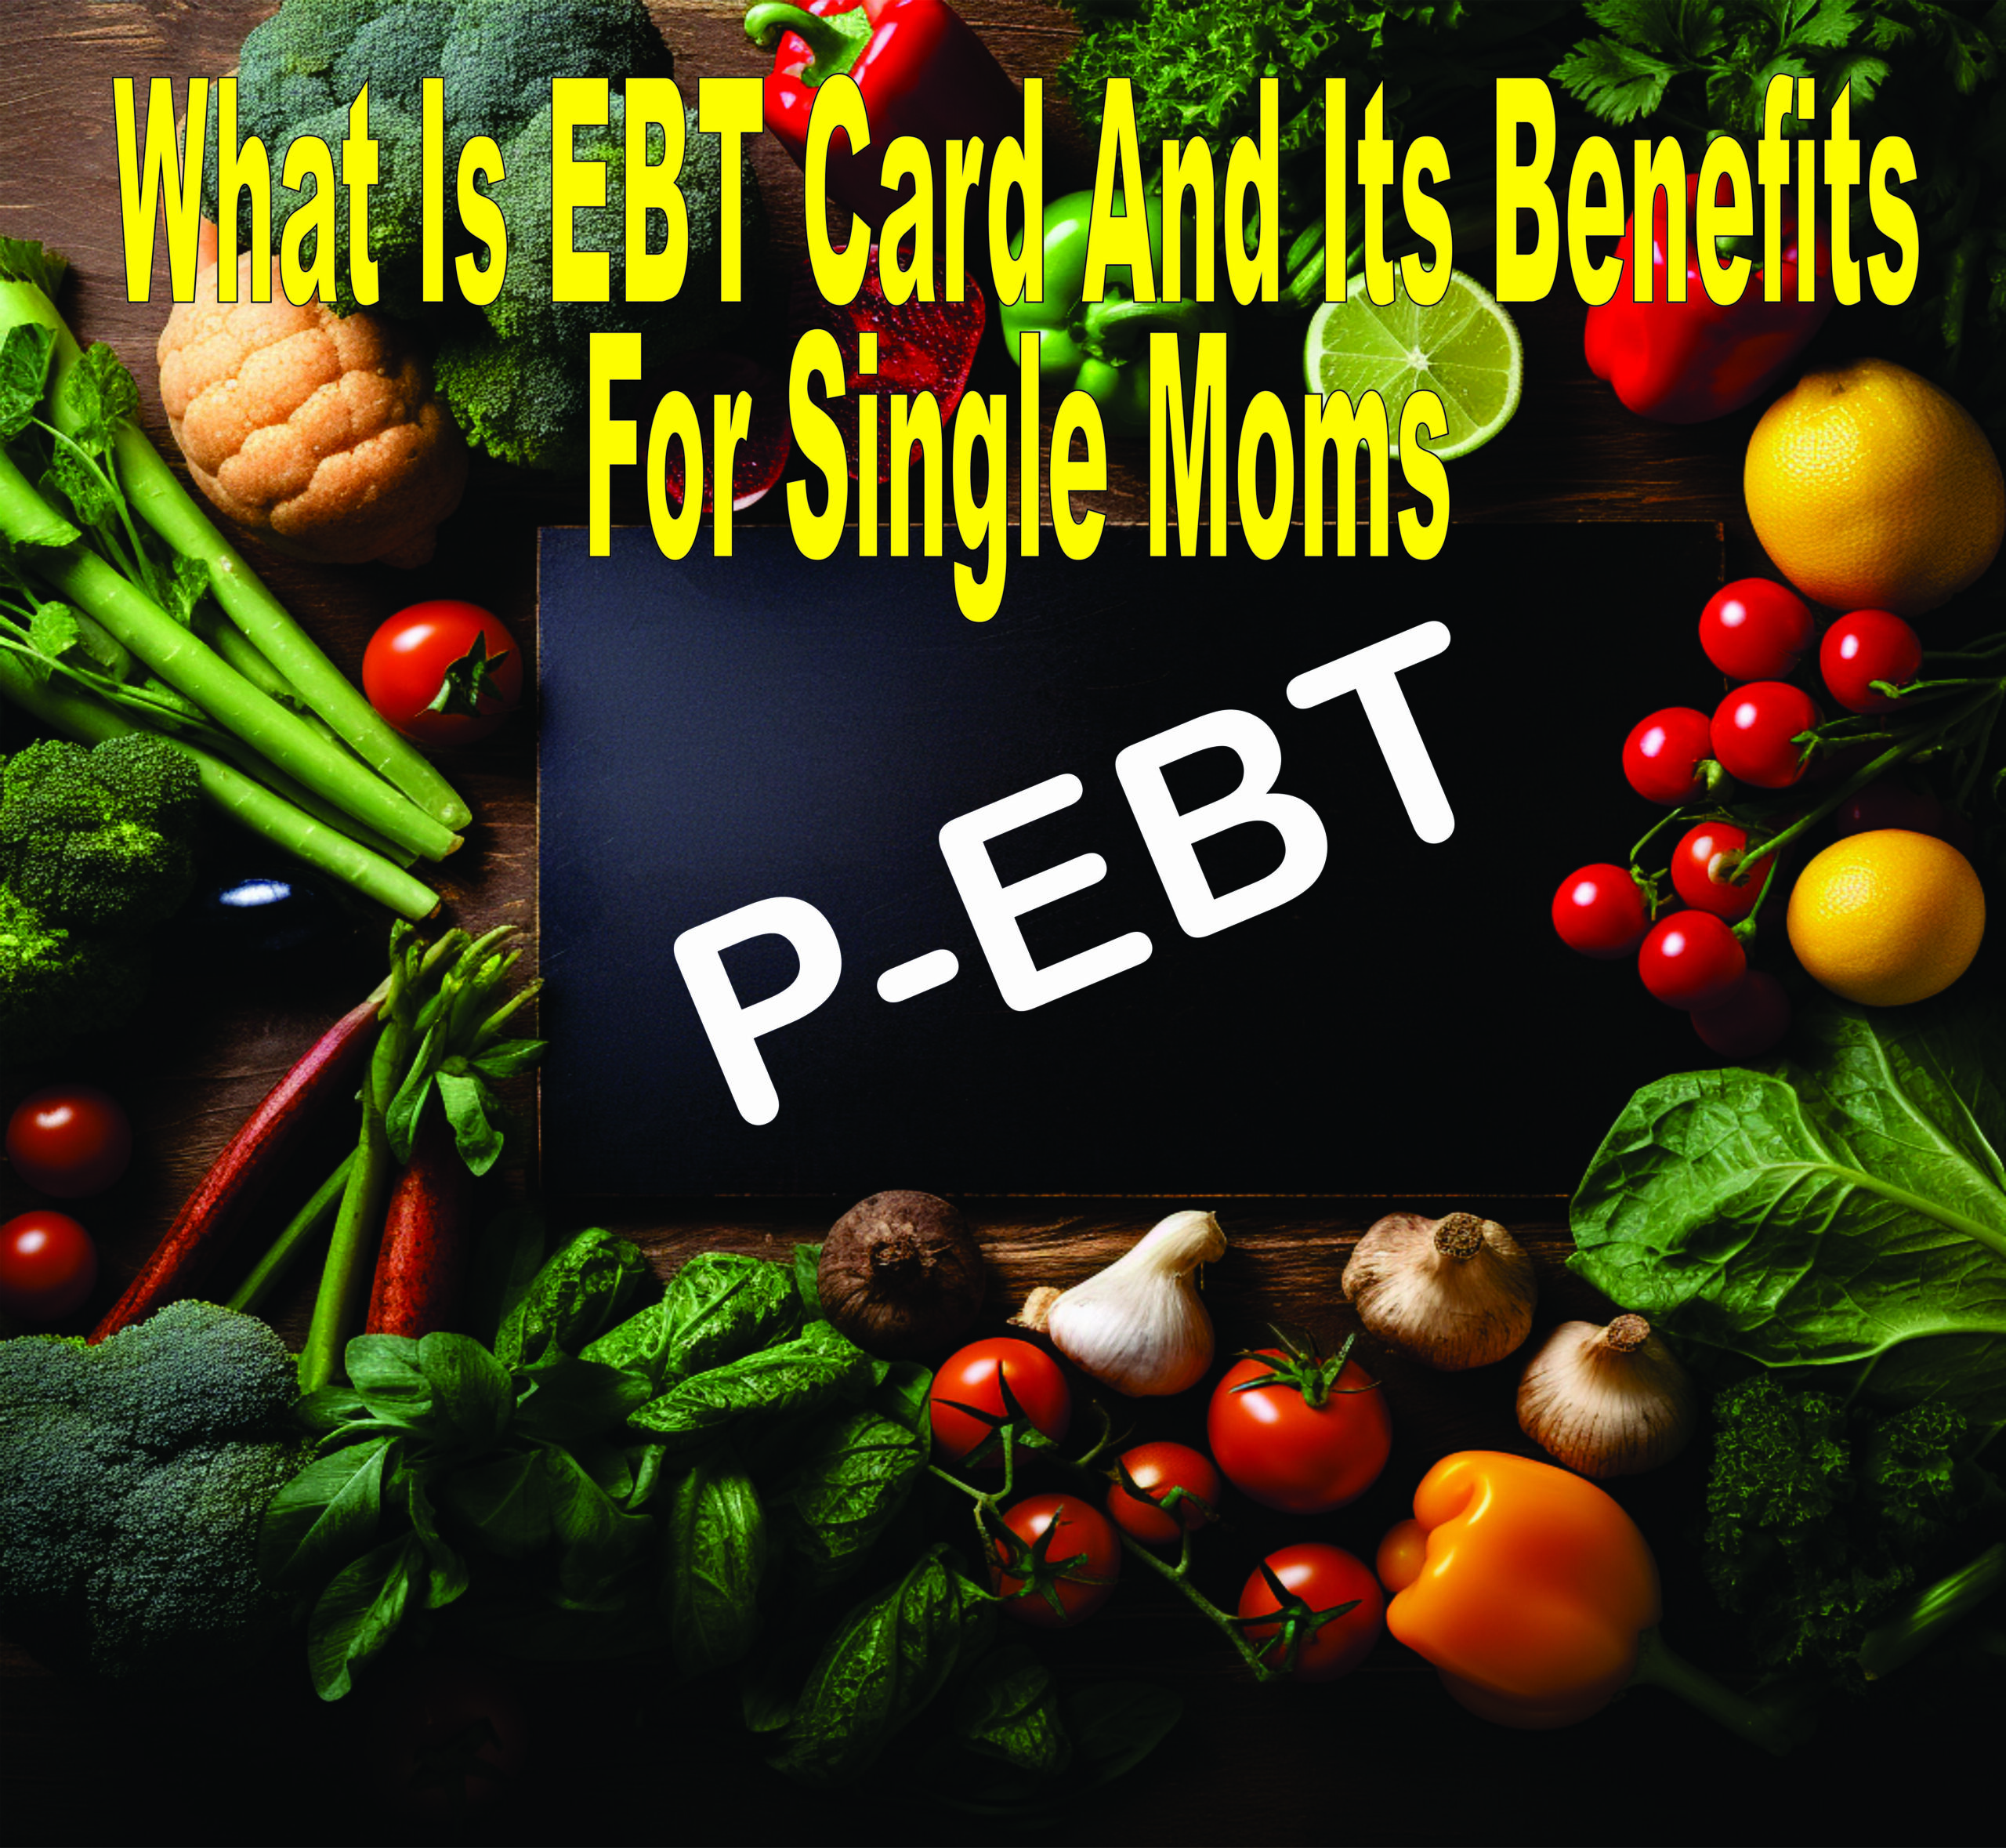 What Is Ebt Card And Its Benefits For Single Moms